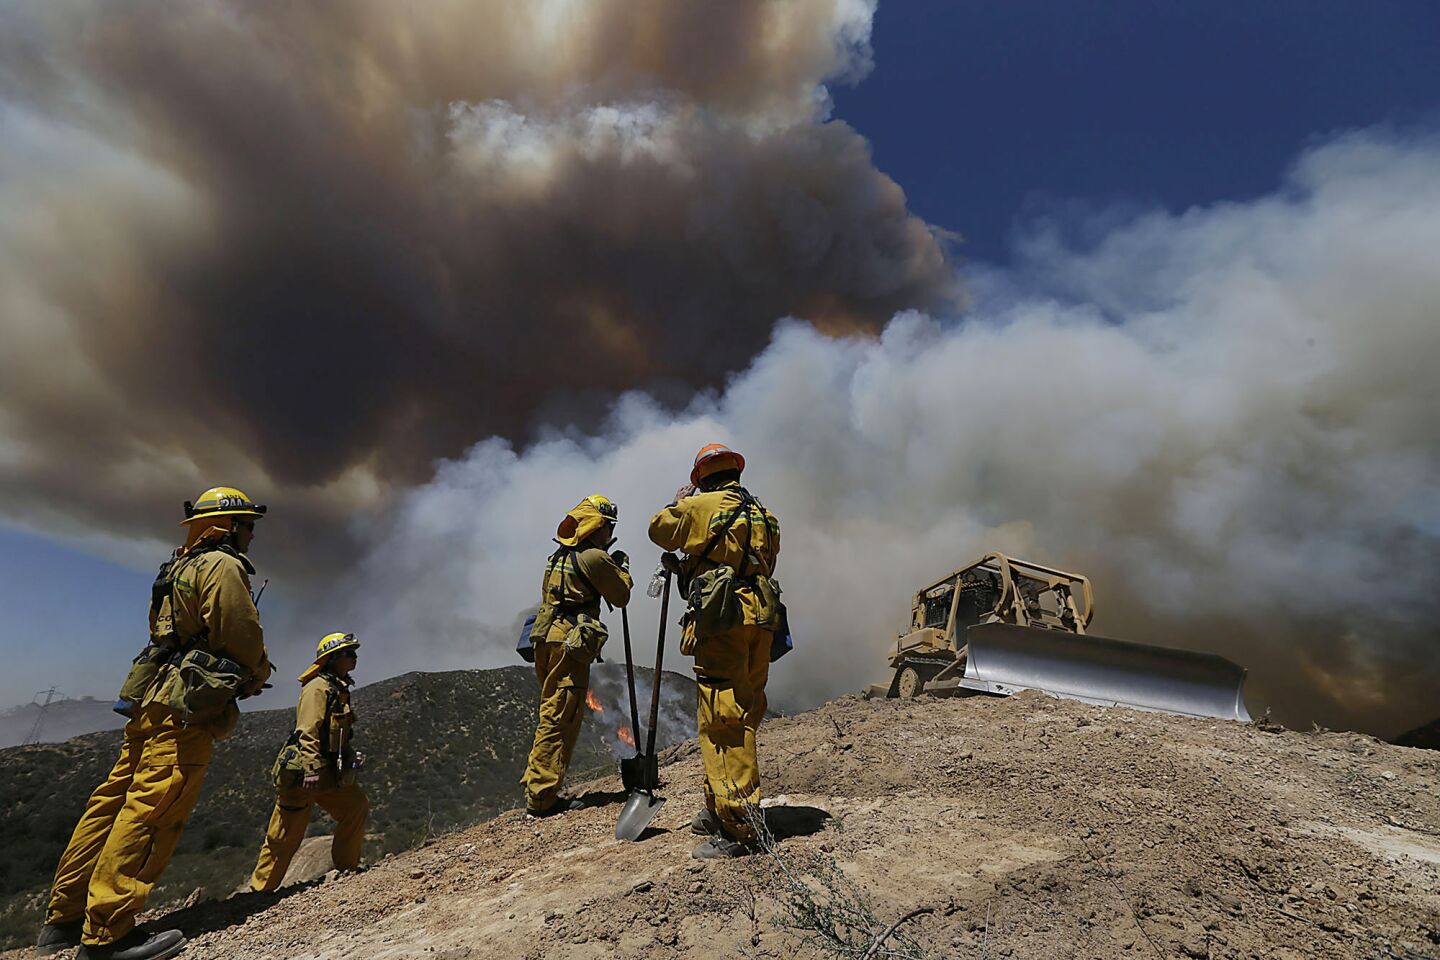 A crew from Duarte stands by as a bulldozer cuts a fire line in an effort to slow the progress of the Powerhouse fire near Castaic.